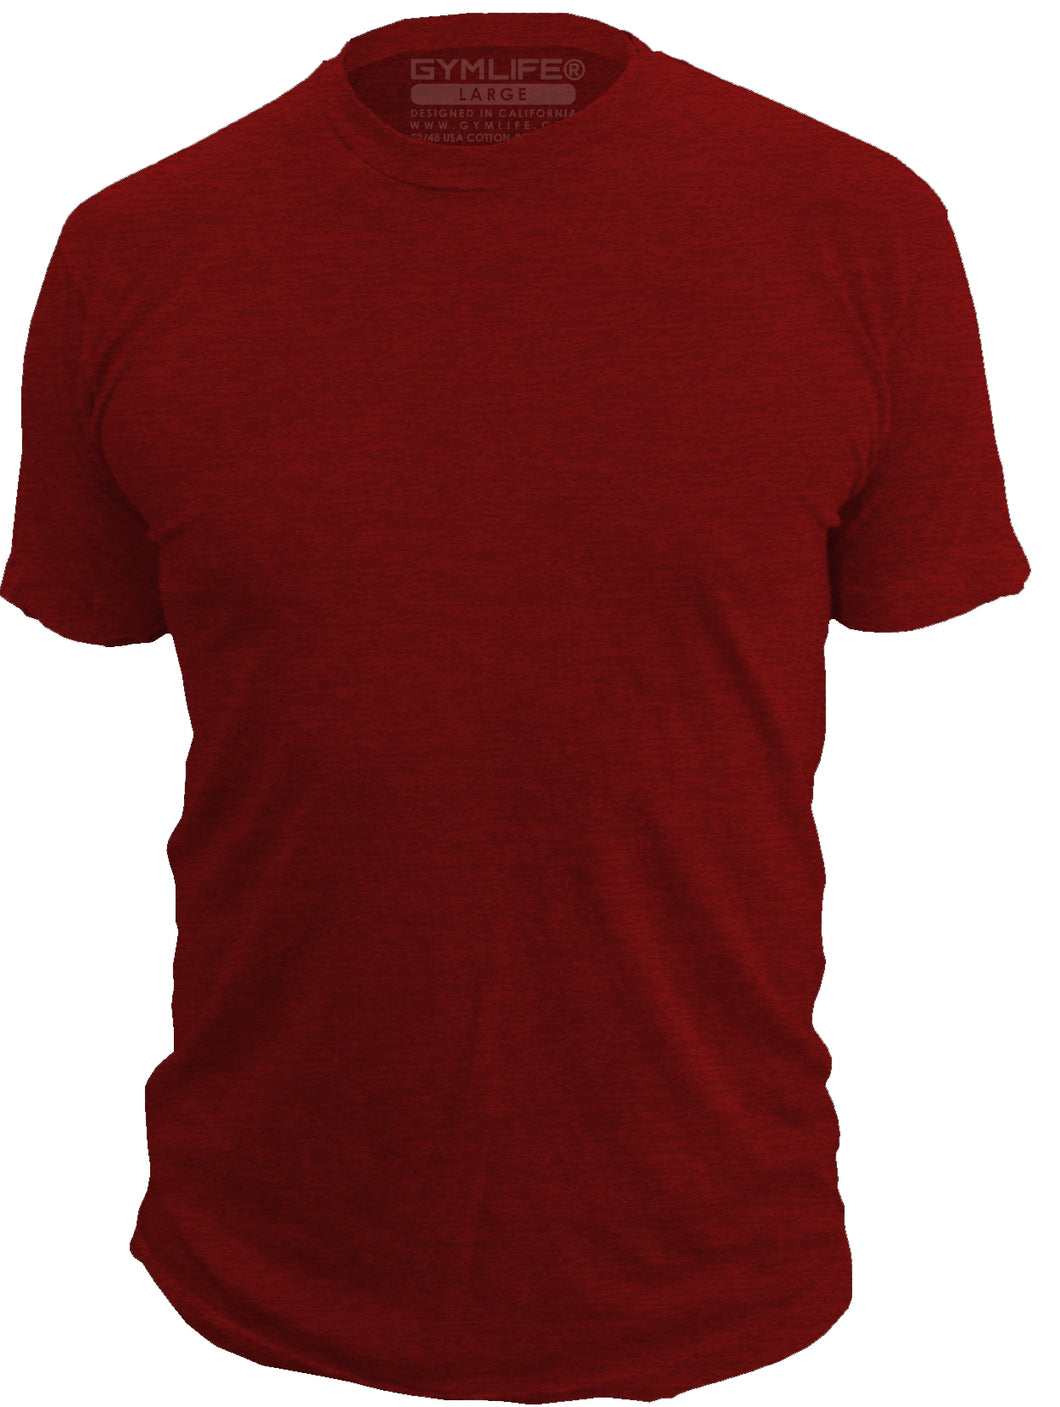 GYM LIFE - BLANK - Mens Athletic 52/48 Premium T-Shirt, Made of USA, Red Heather